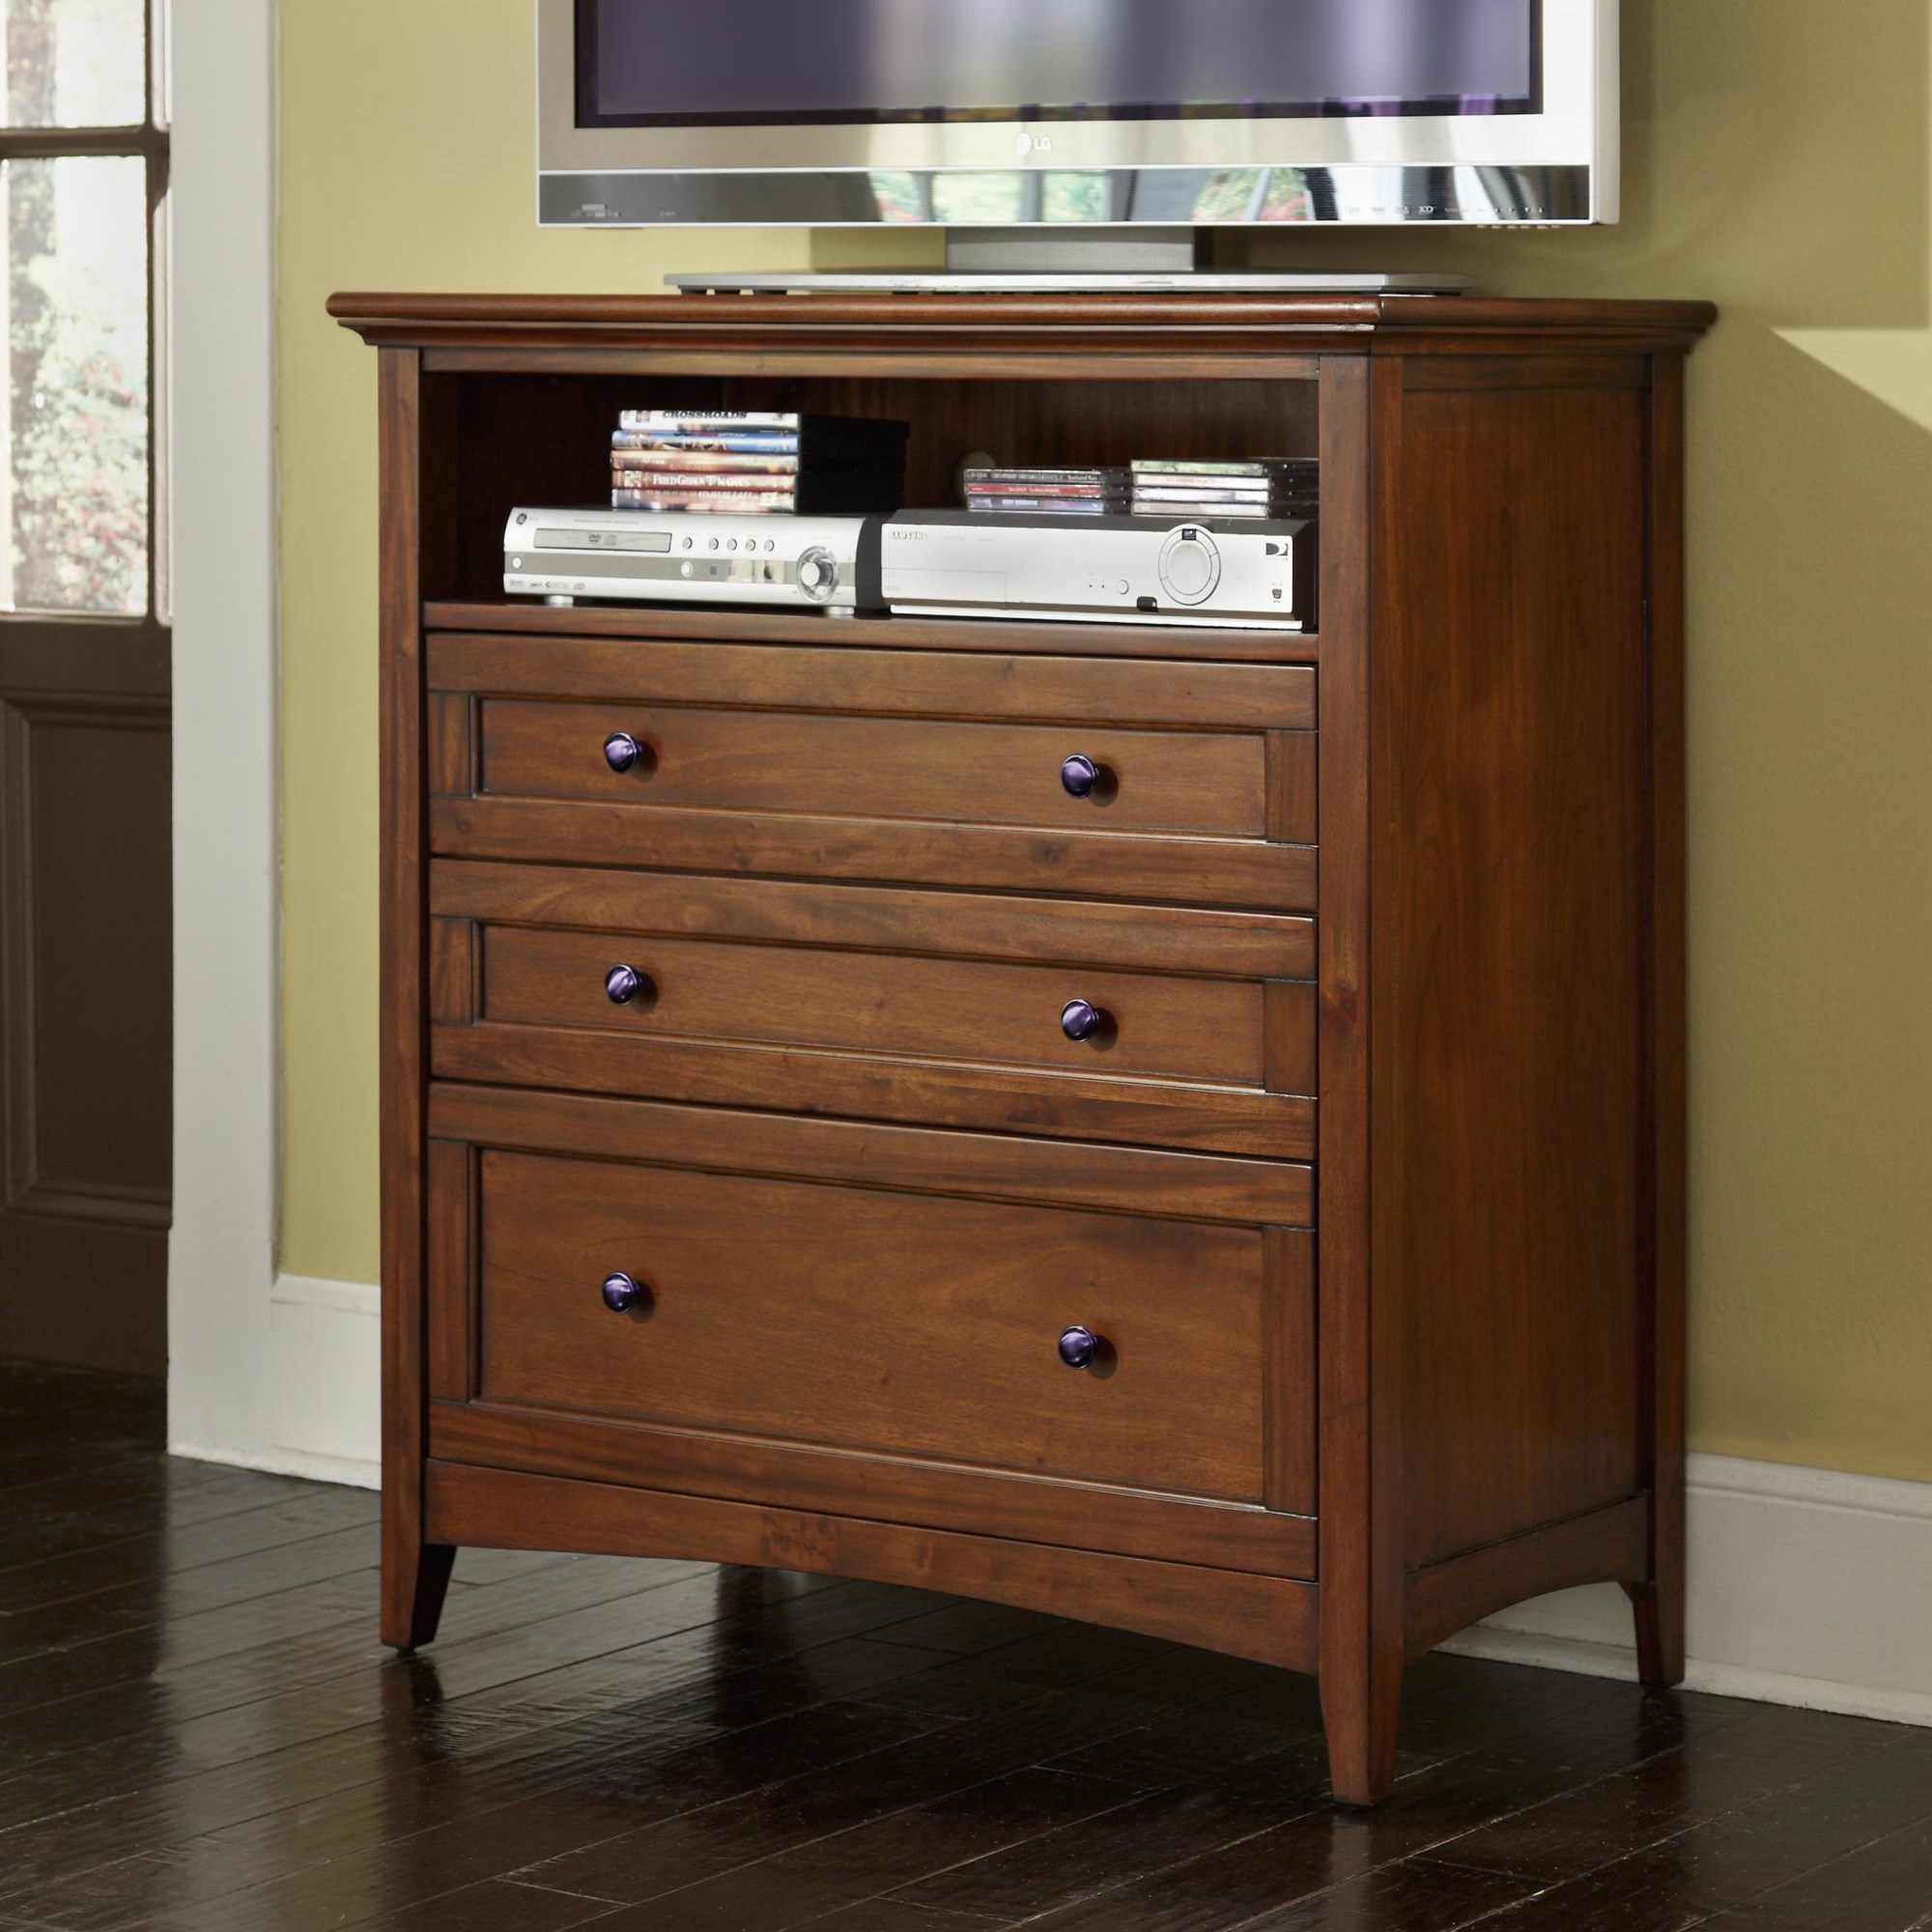 Aamerica Westlake Wslcb5740 Transitional 3 Drawer Media Chest With Cord